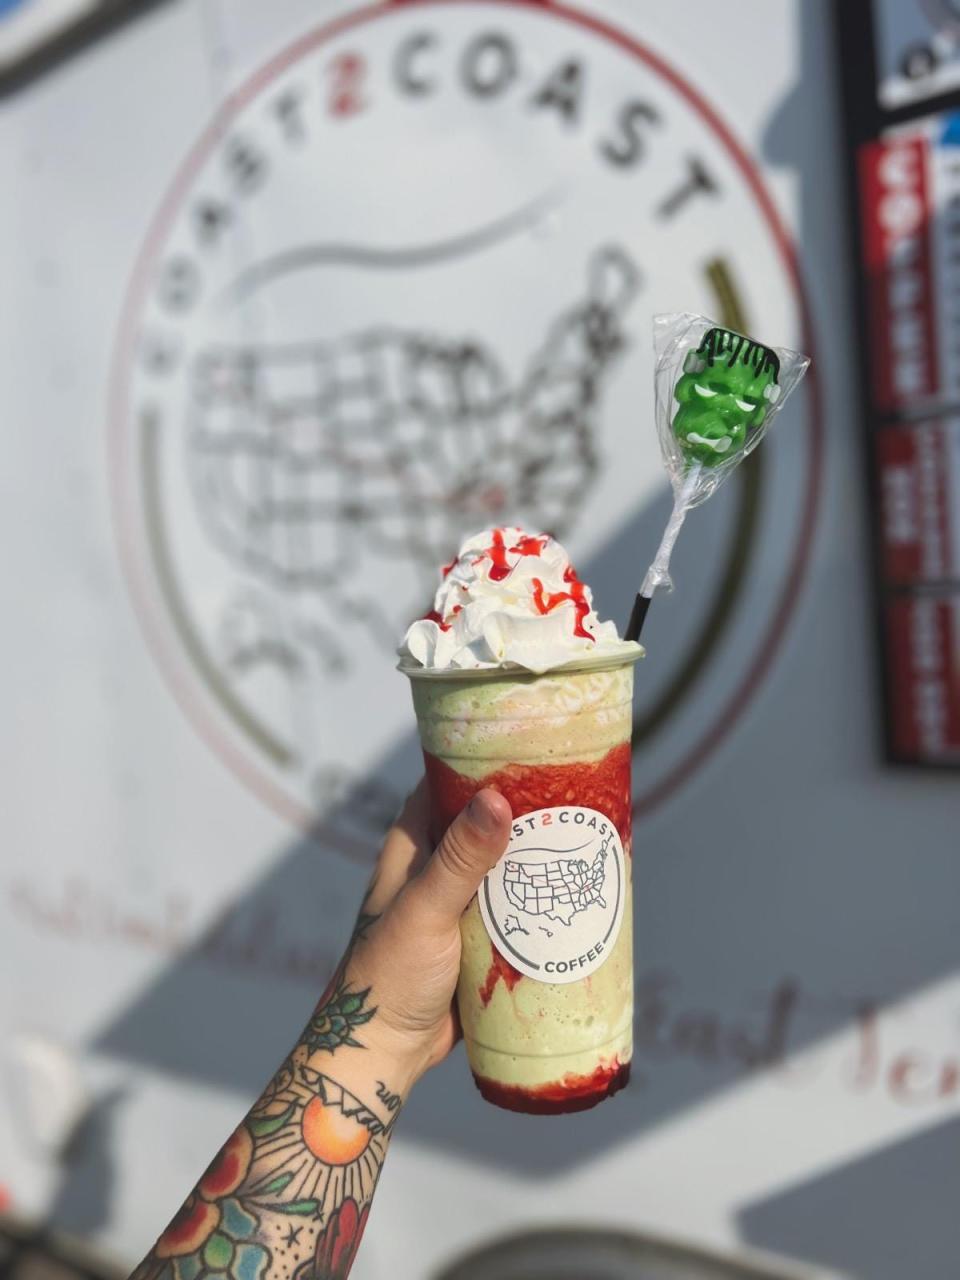 The mobile coffee trailer offers seasonal drinks such as the Frankenstein Frappe, which includes vanilla bean flavoring and raspberry puree.